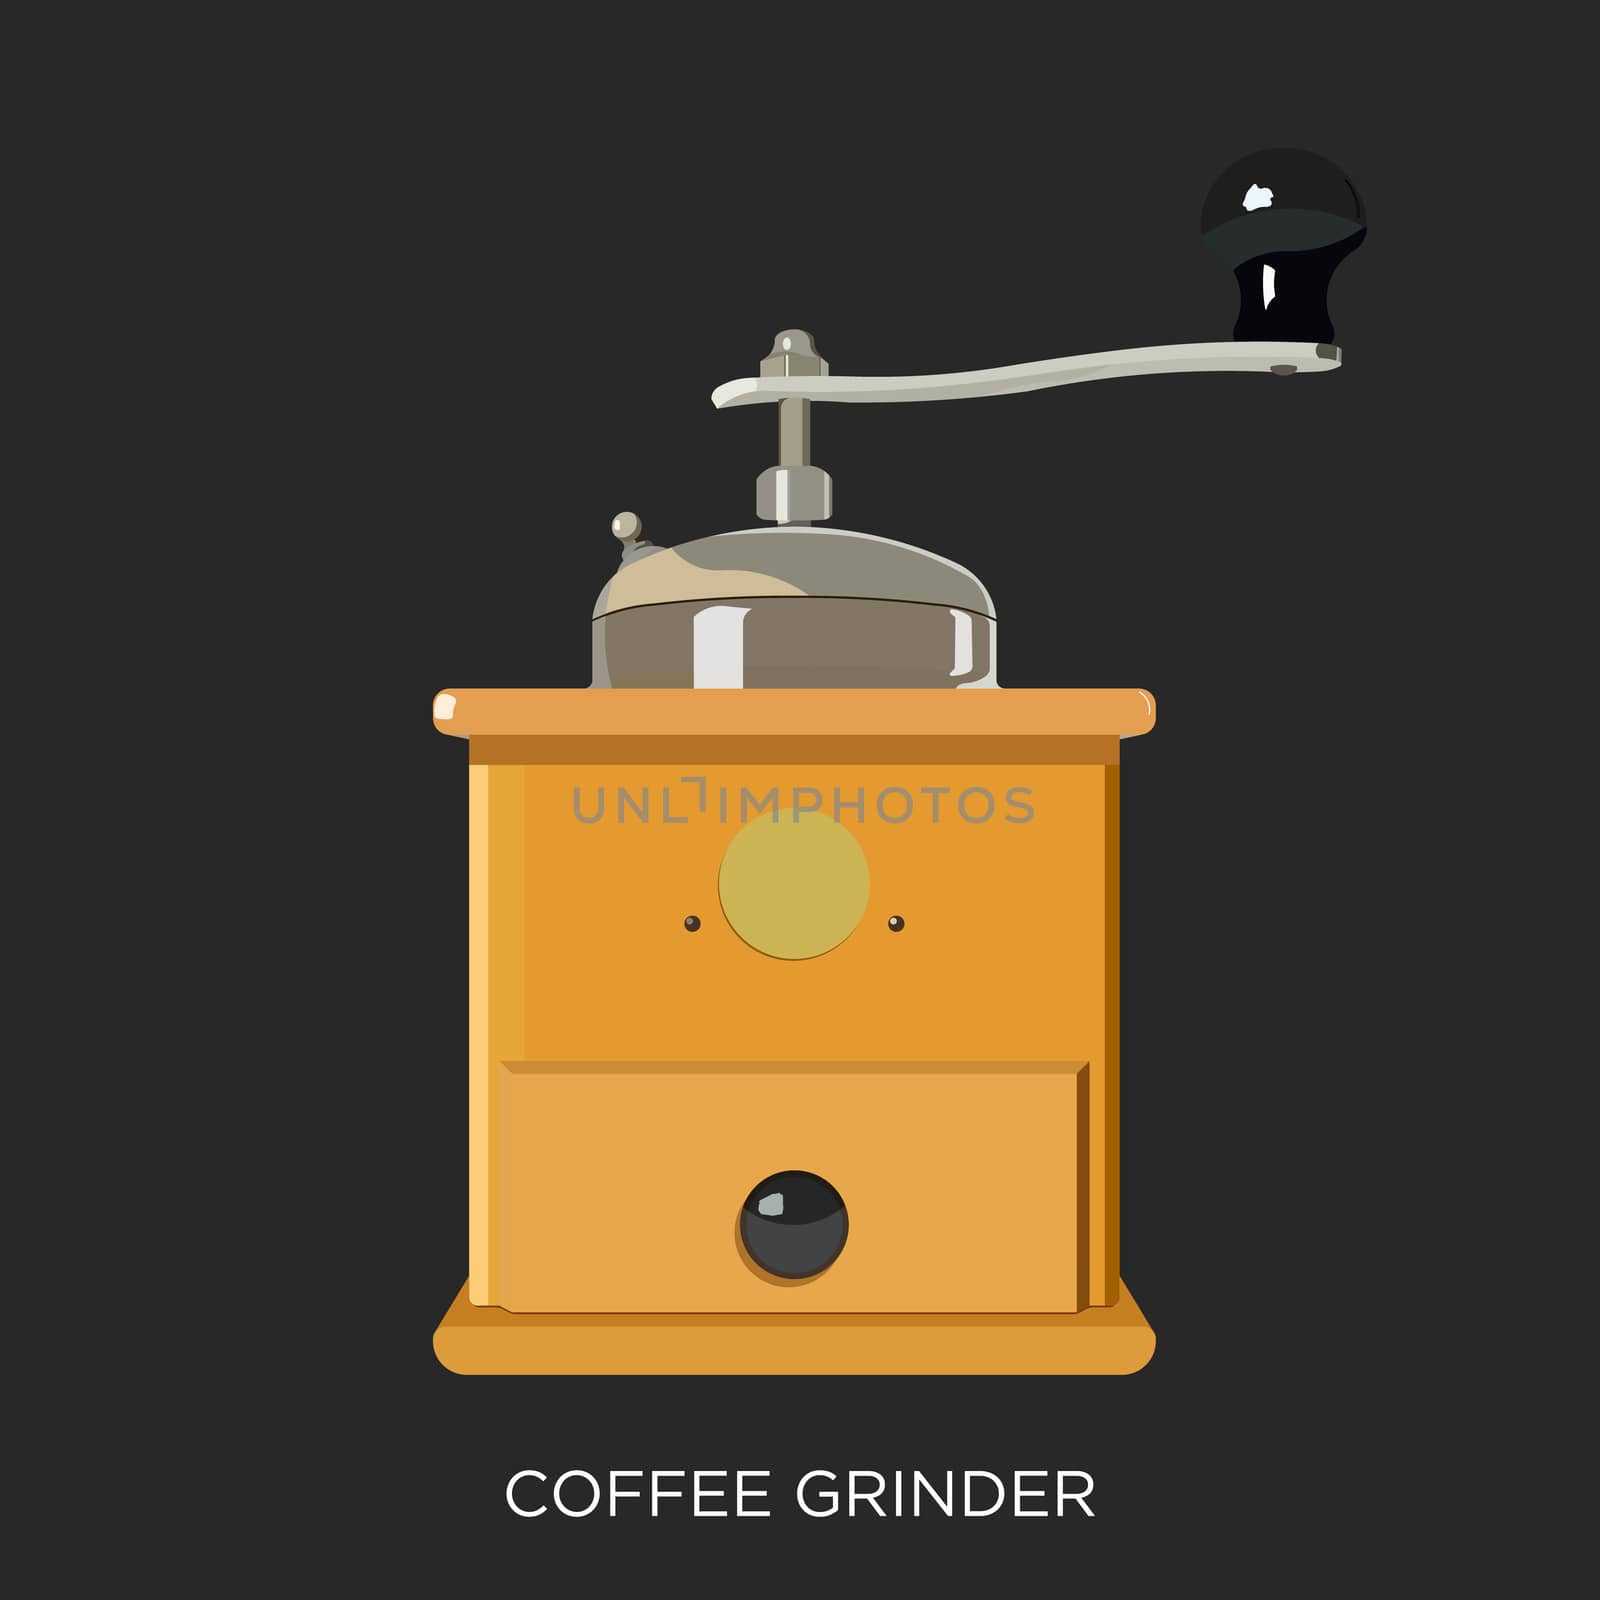 Coffee Grinder for Coffee Beans by landscafe